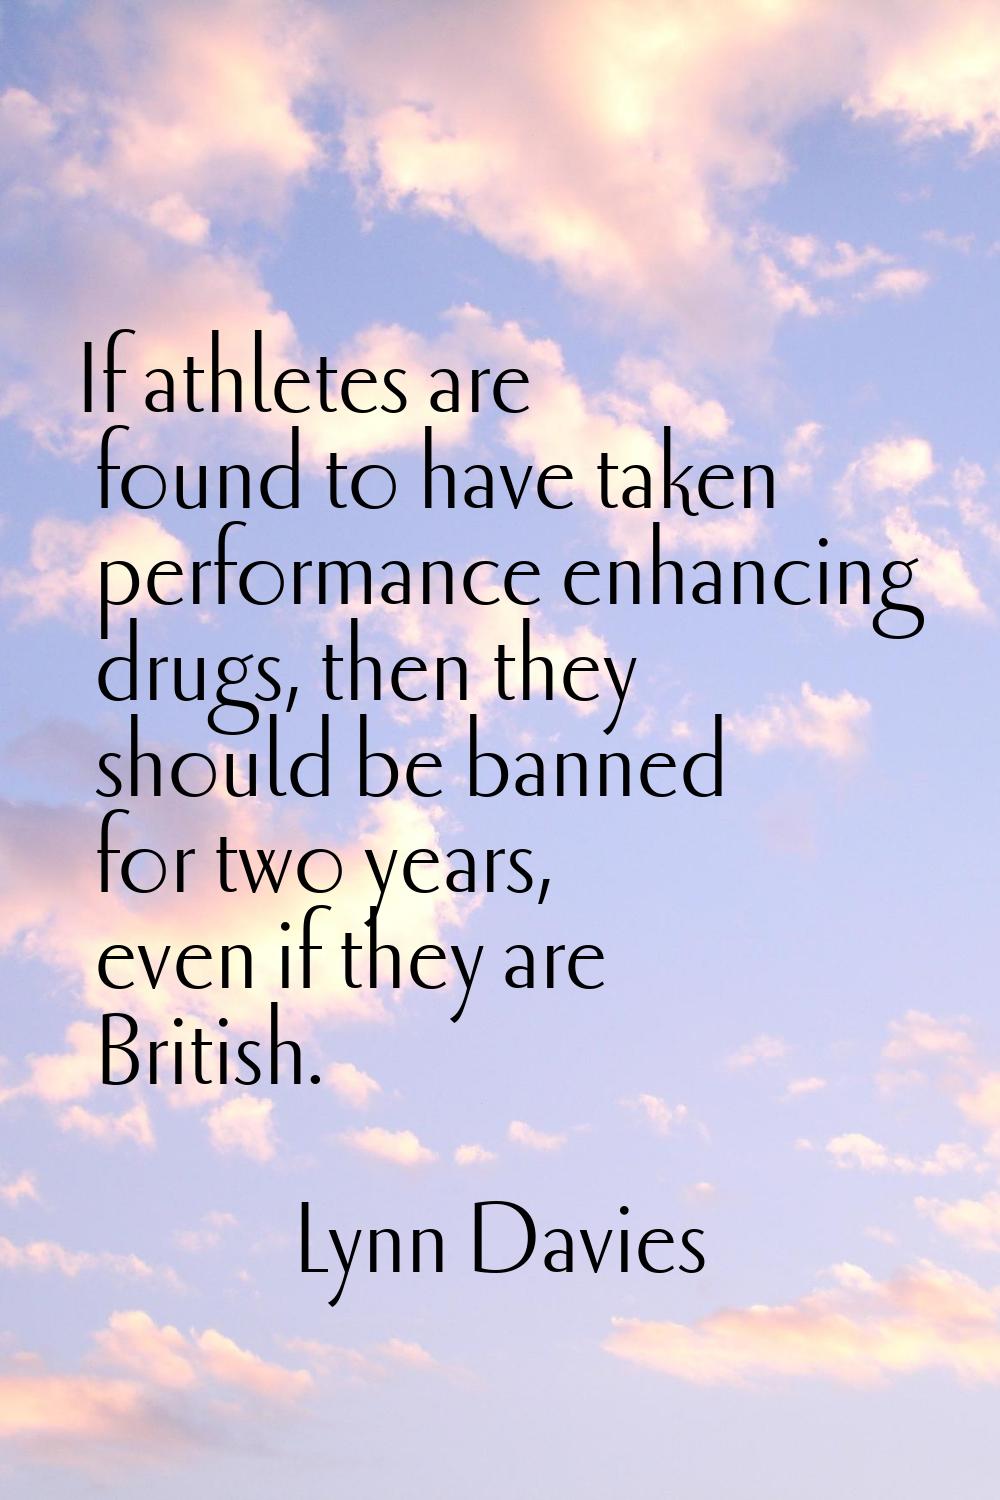 If athletes are found to have taken performance enhancing drugs, then they should be banned for two